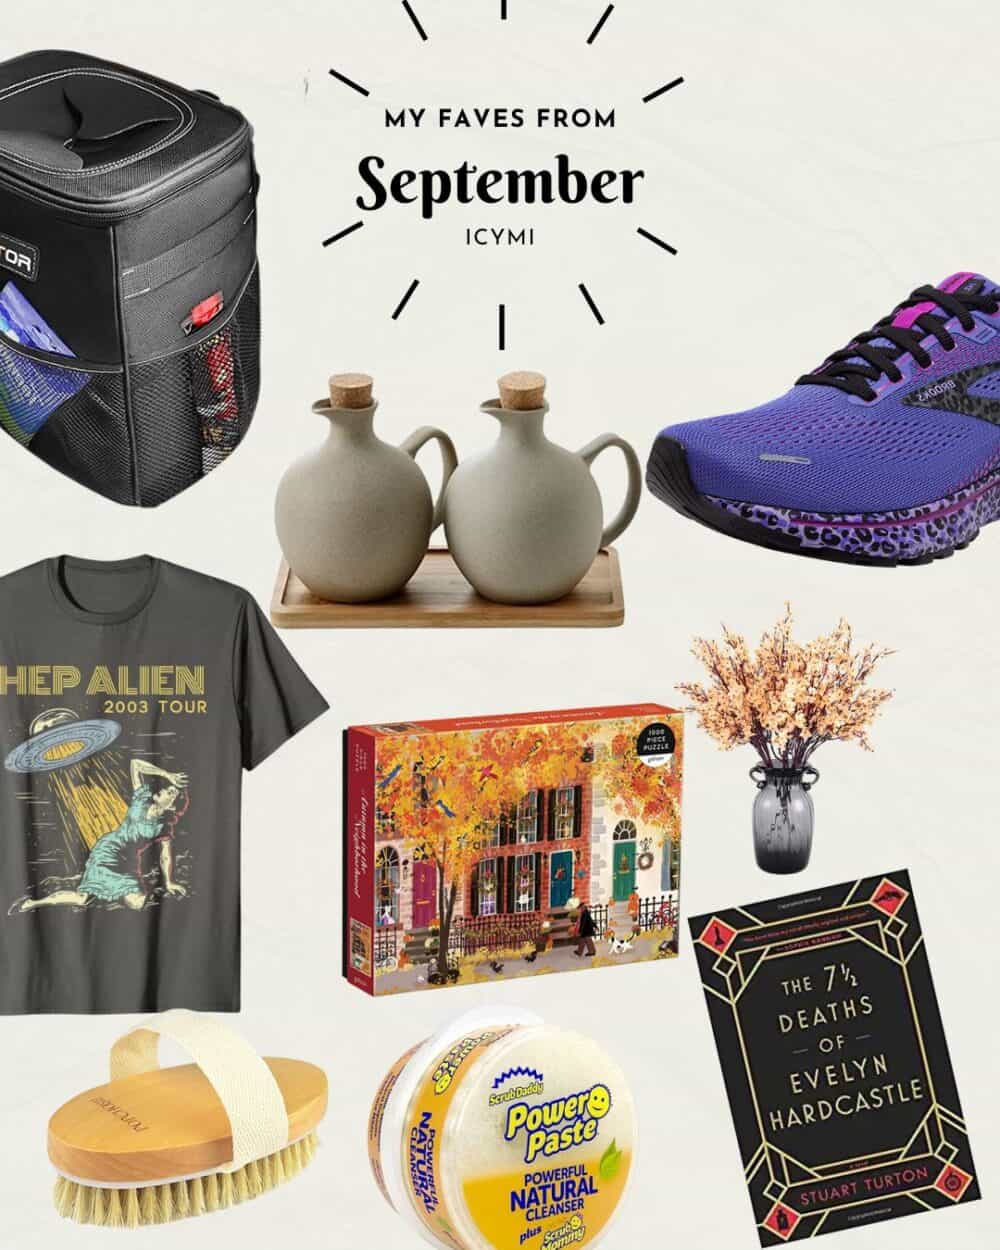 collage of favorite items from September